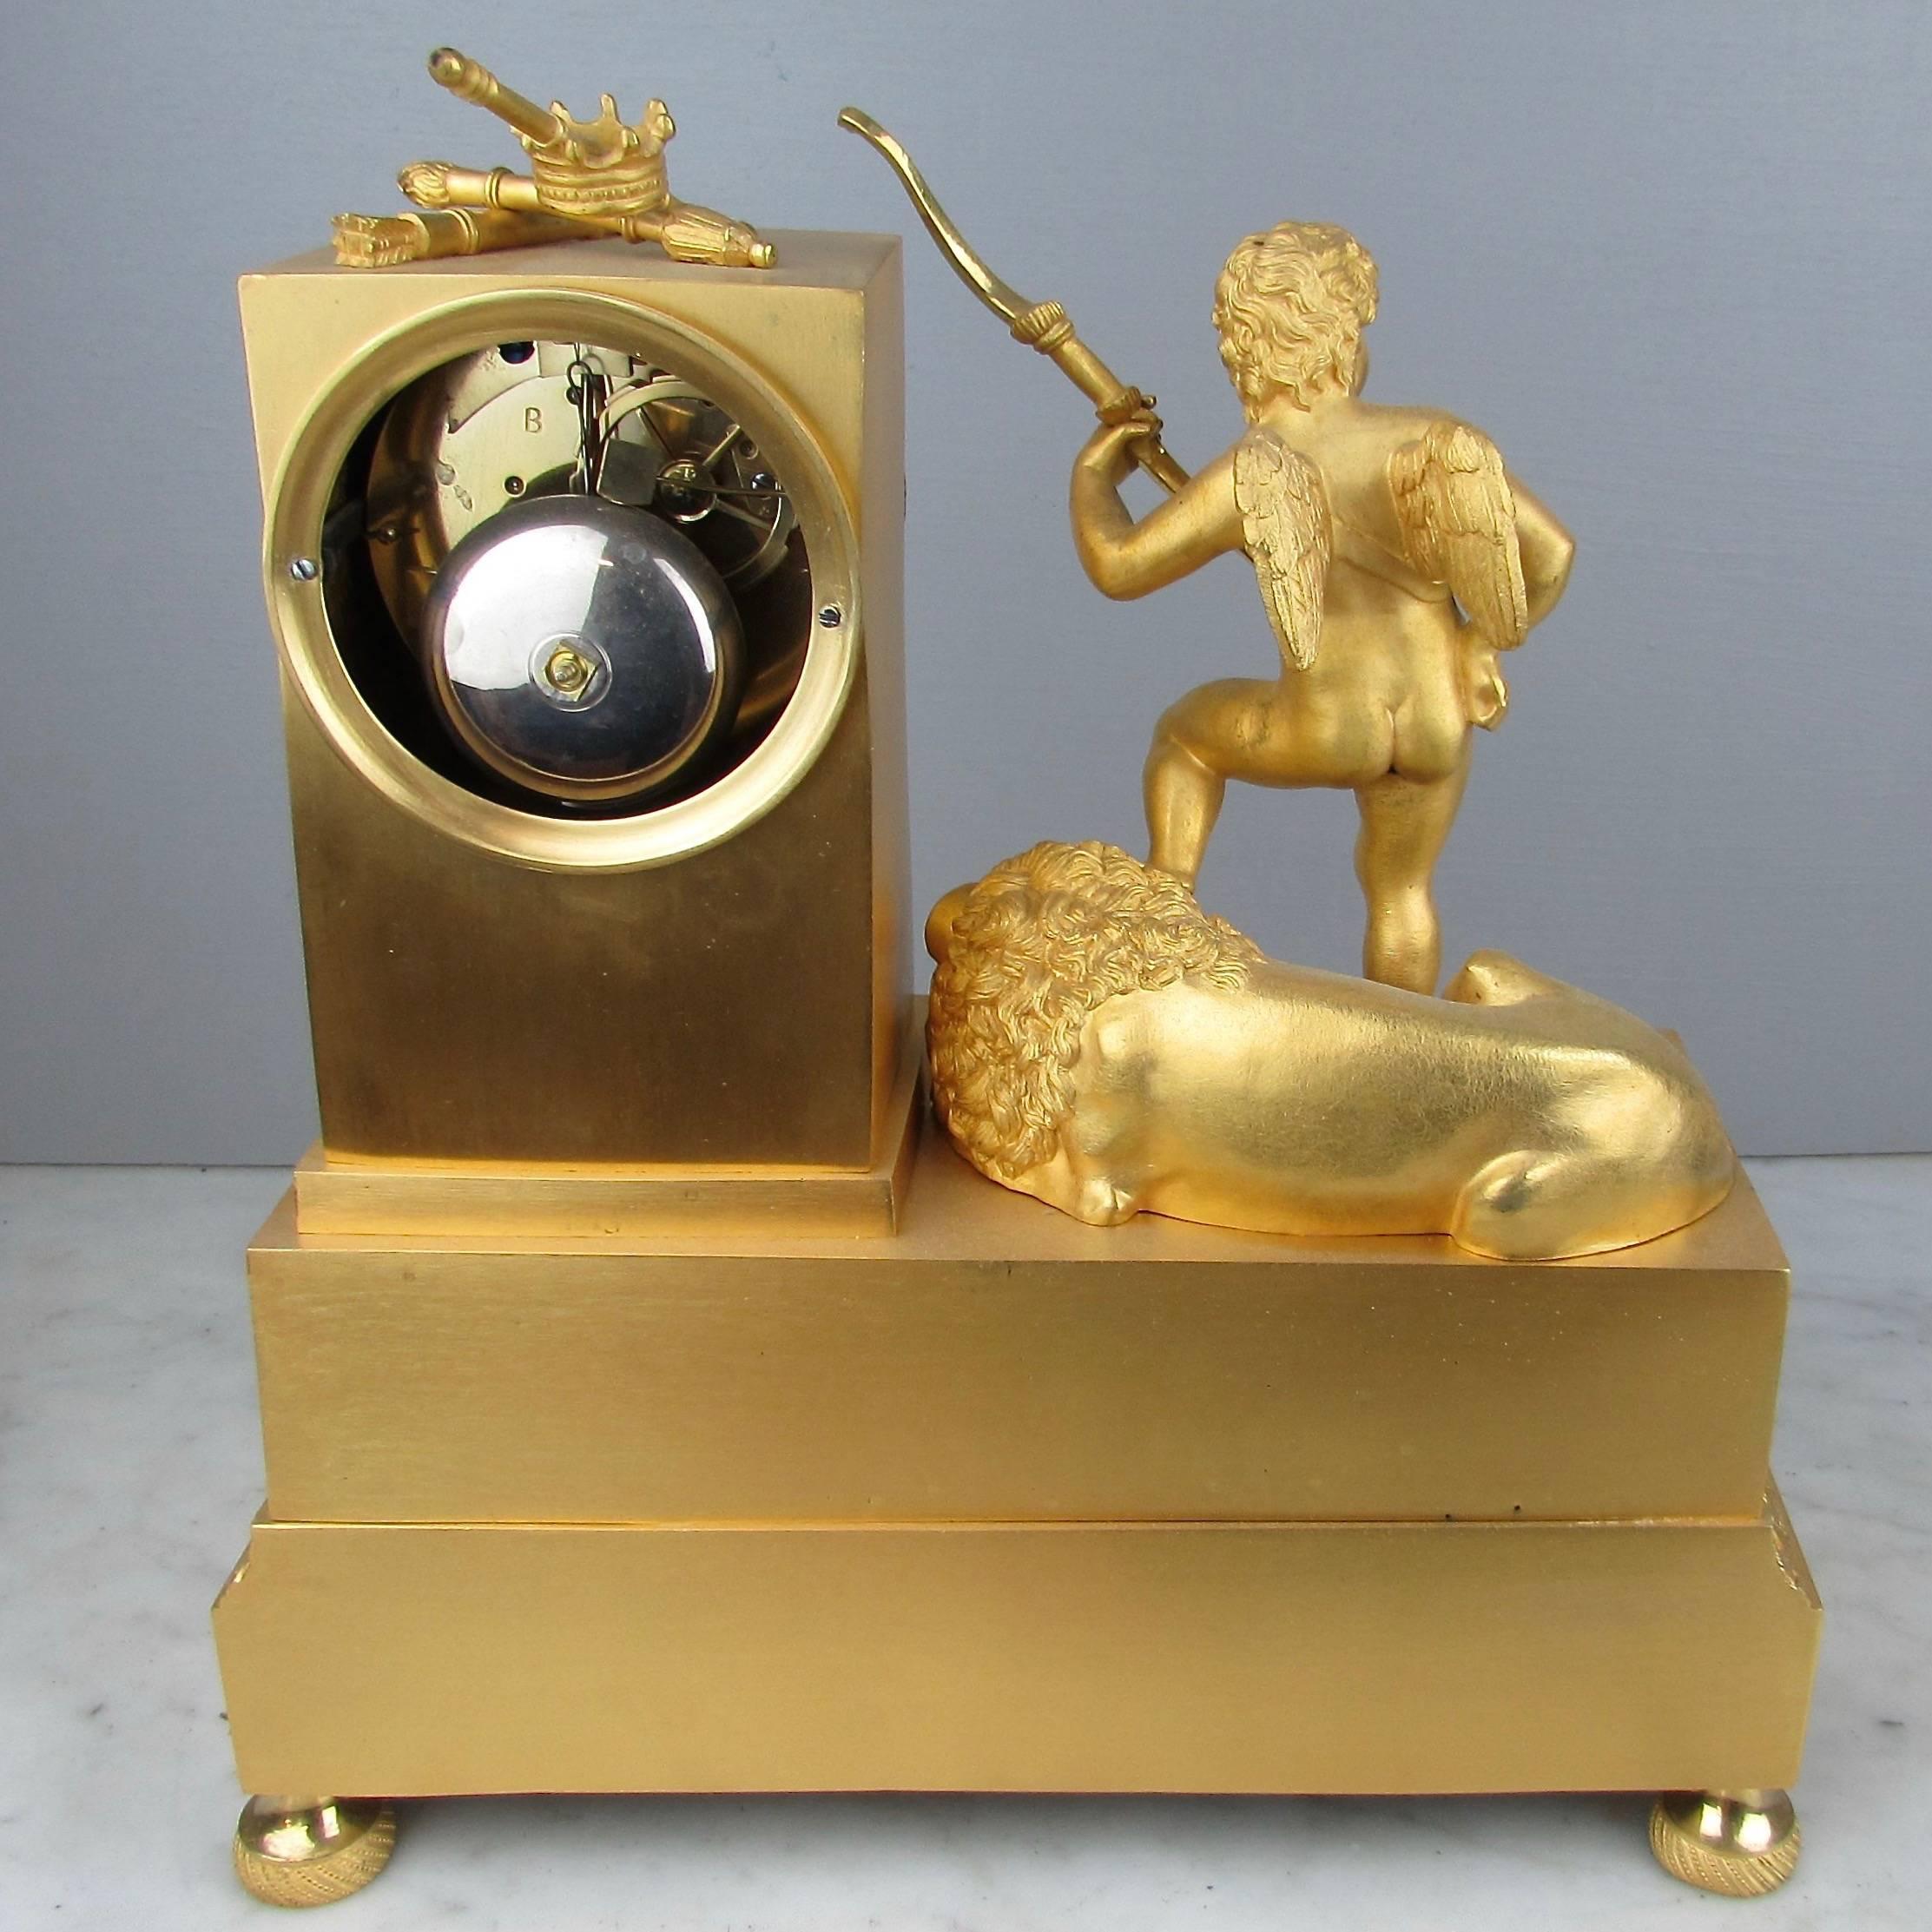 Early 19th Century French Gilded Ormolu Mantle Clock For Sale 2